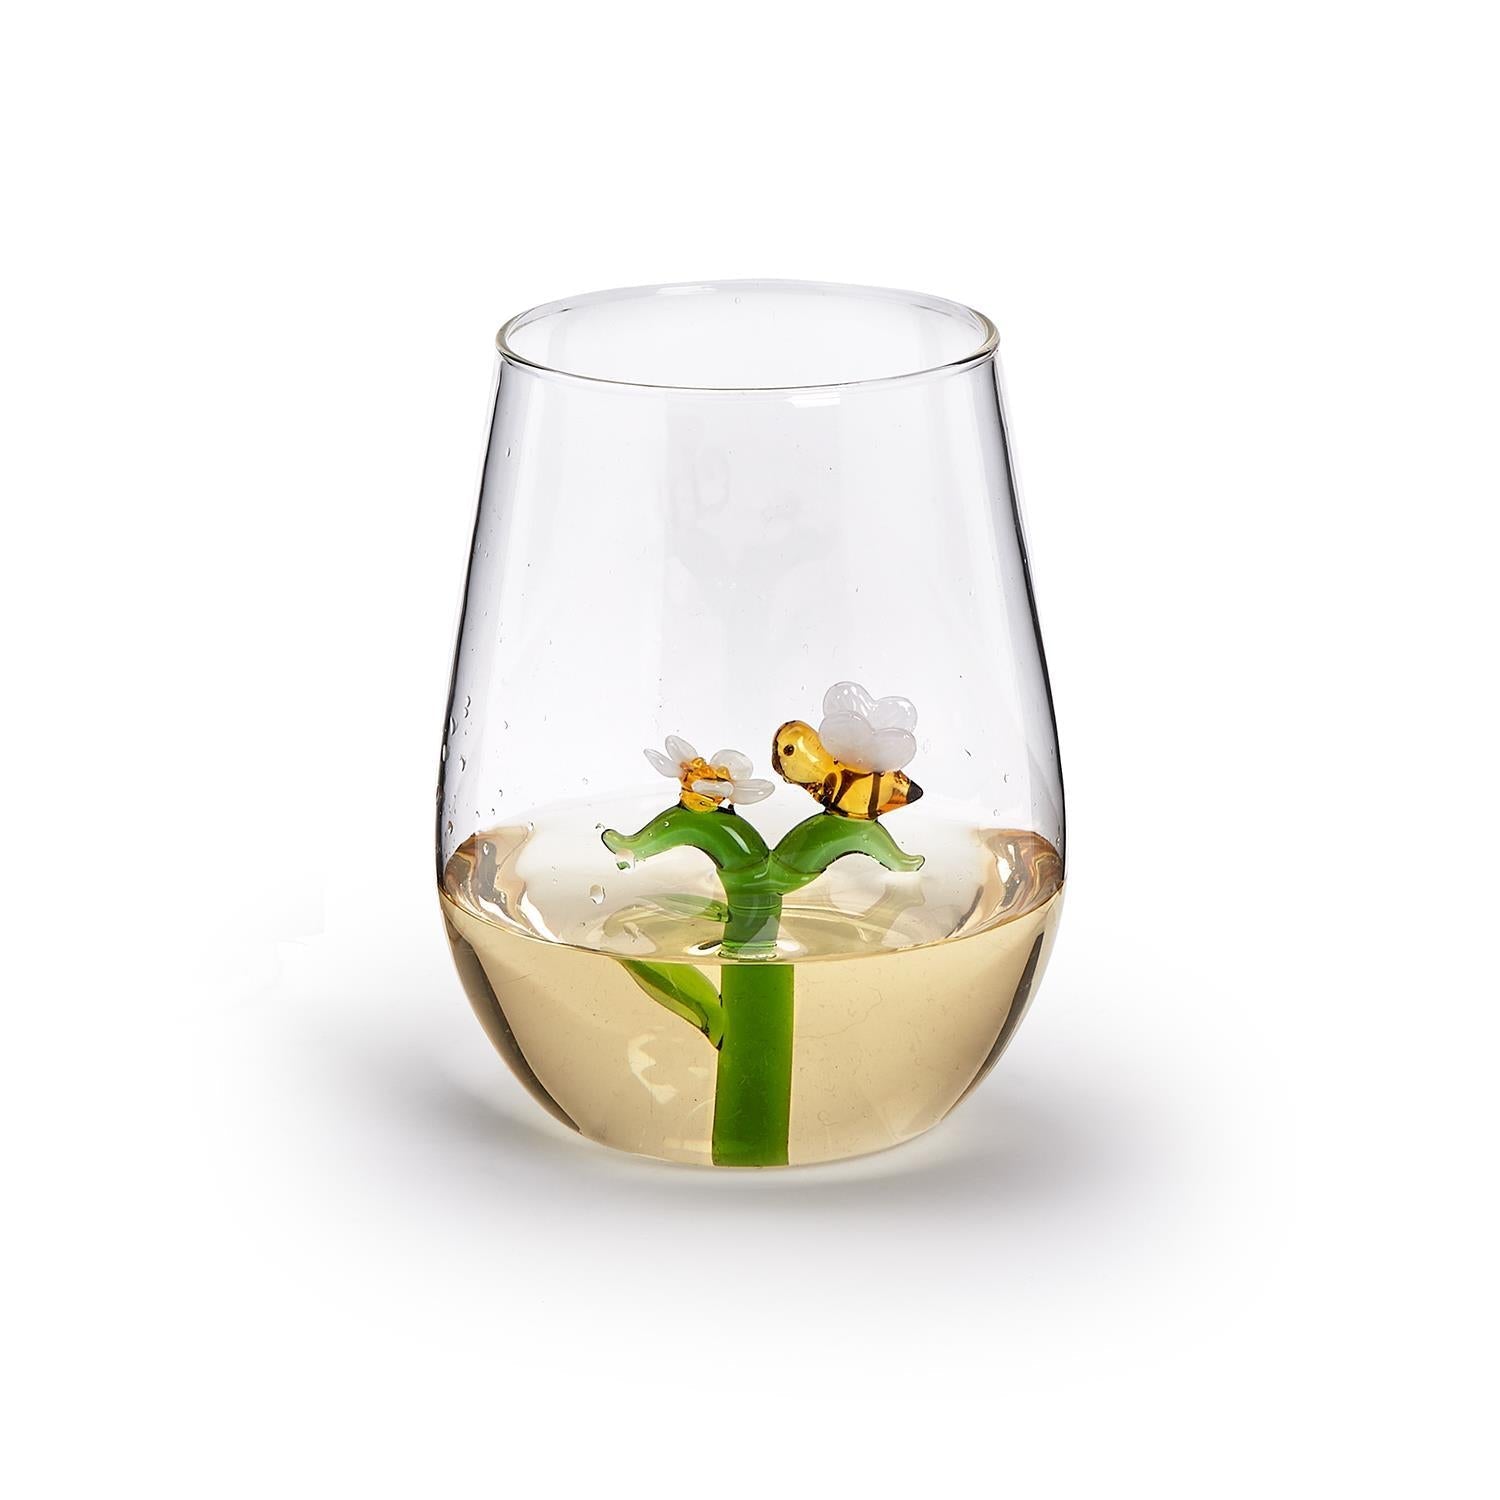 Bee and Flower Stemless Wine Glass